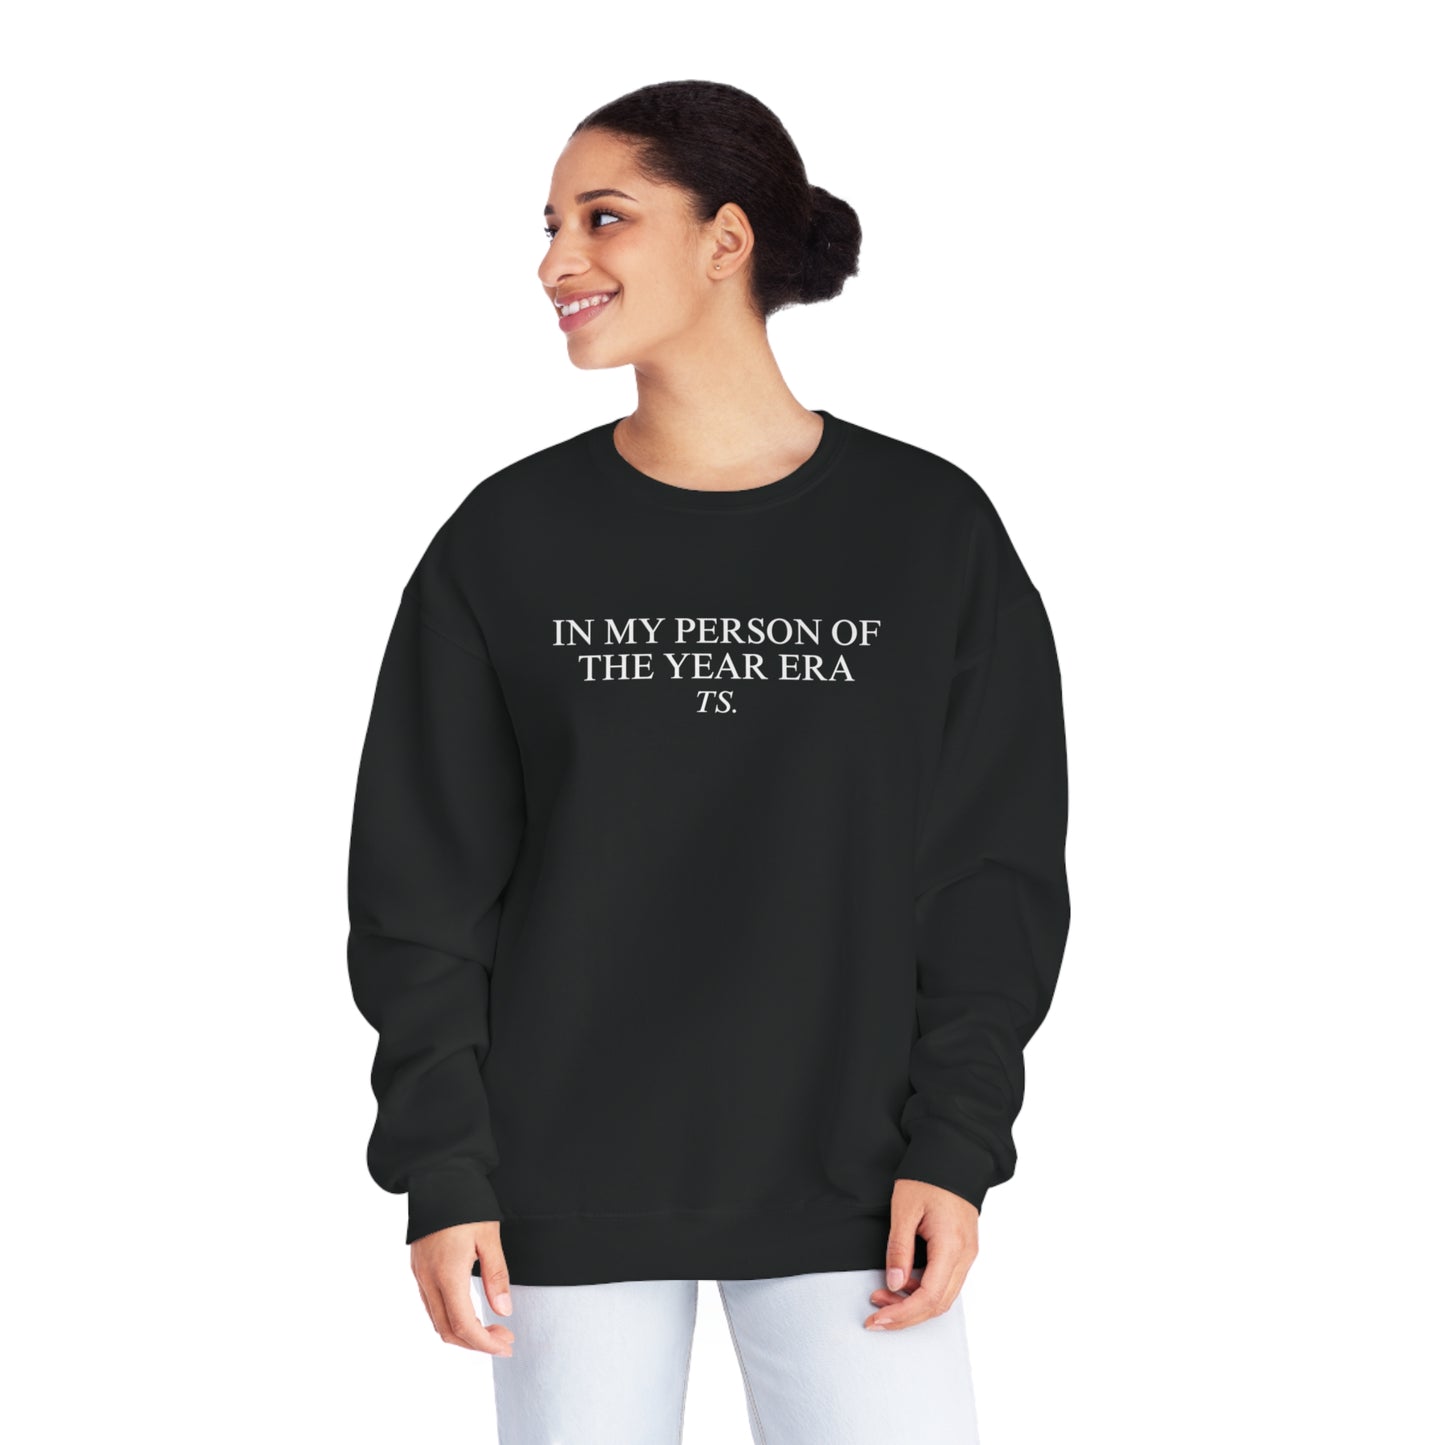 In My Person Of The Year Era Crewneck